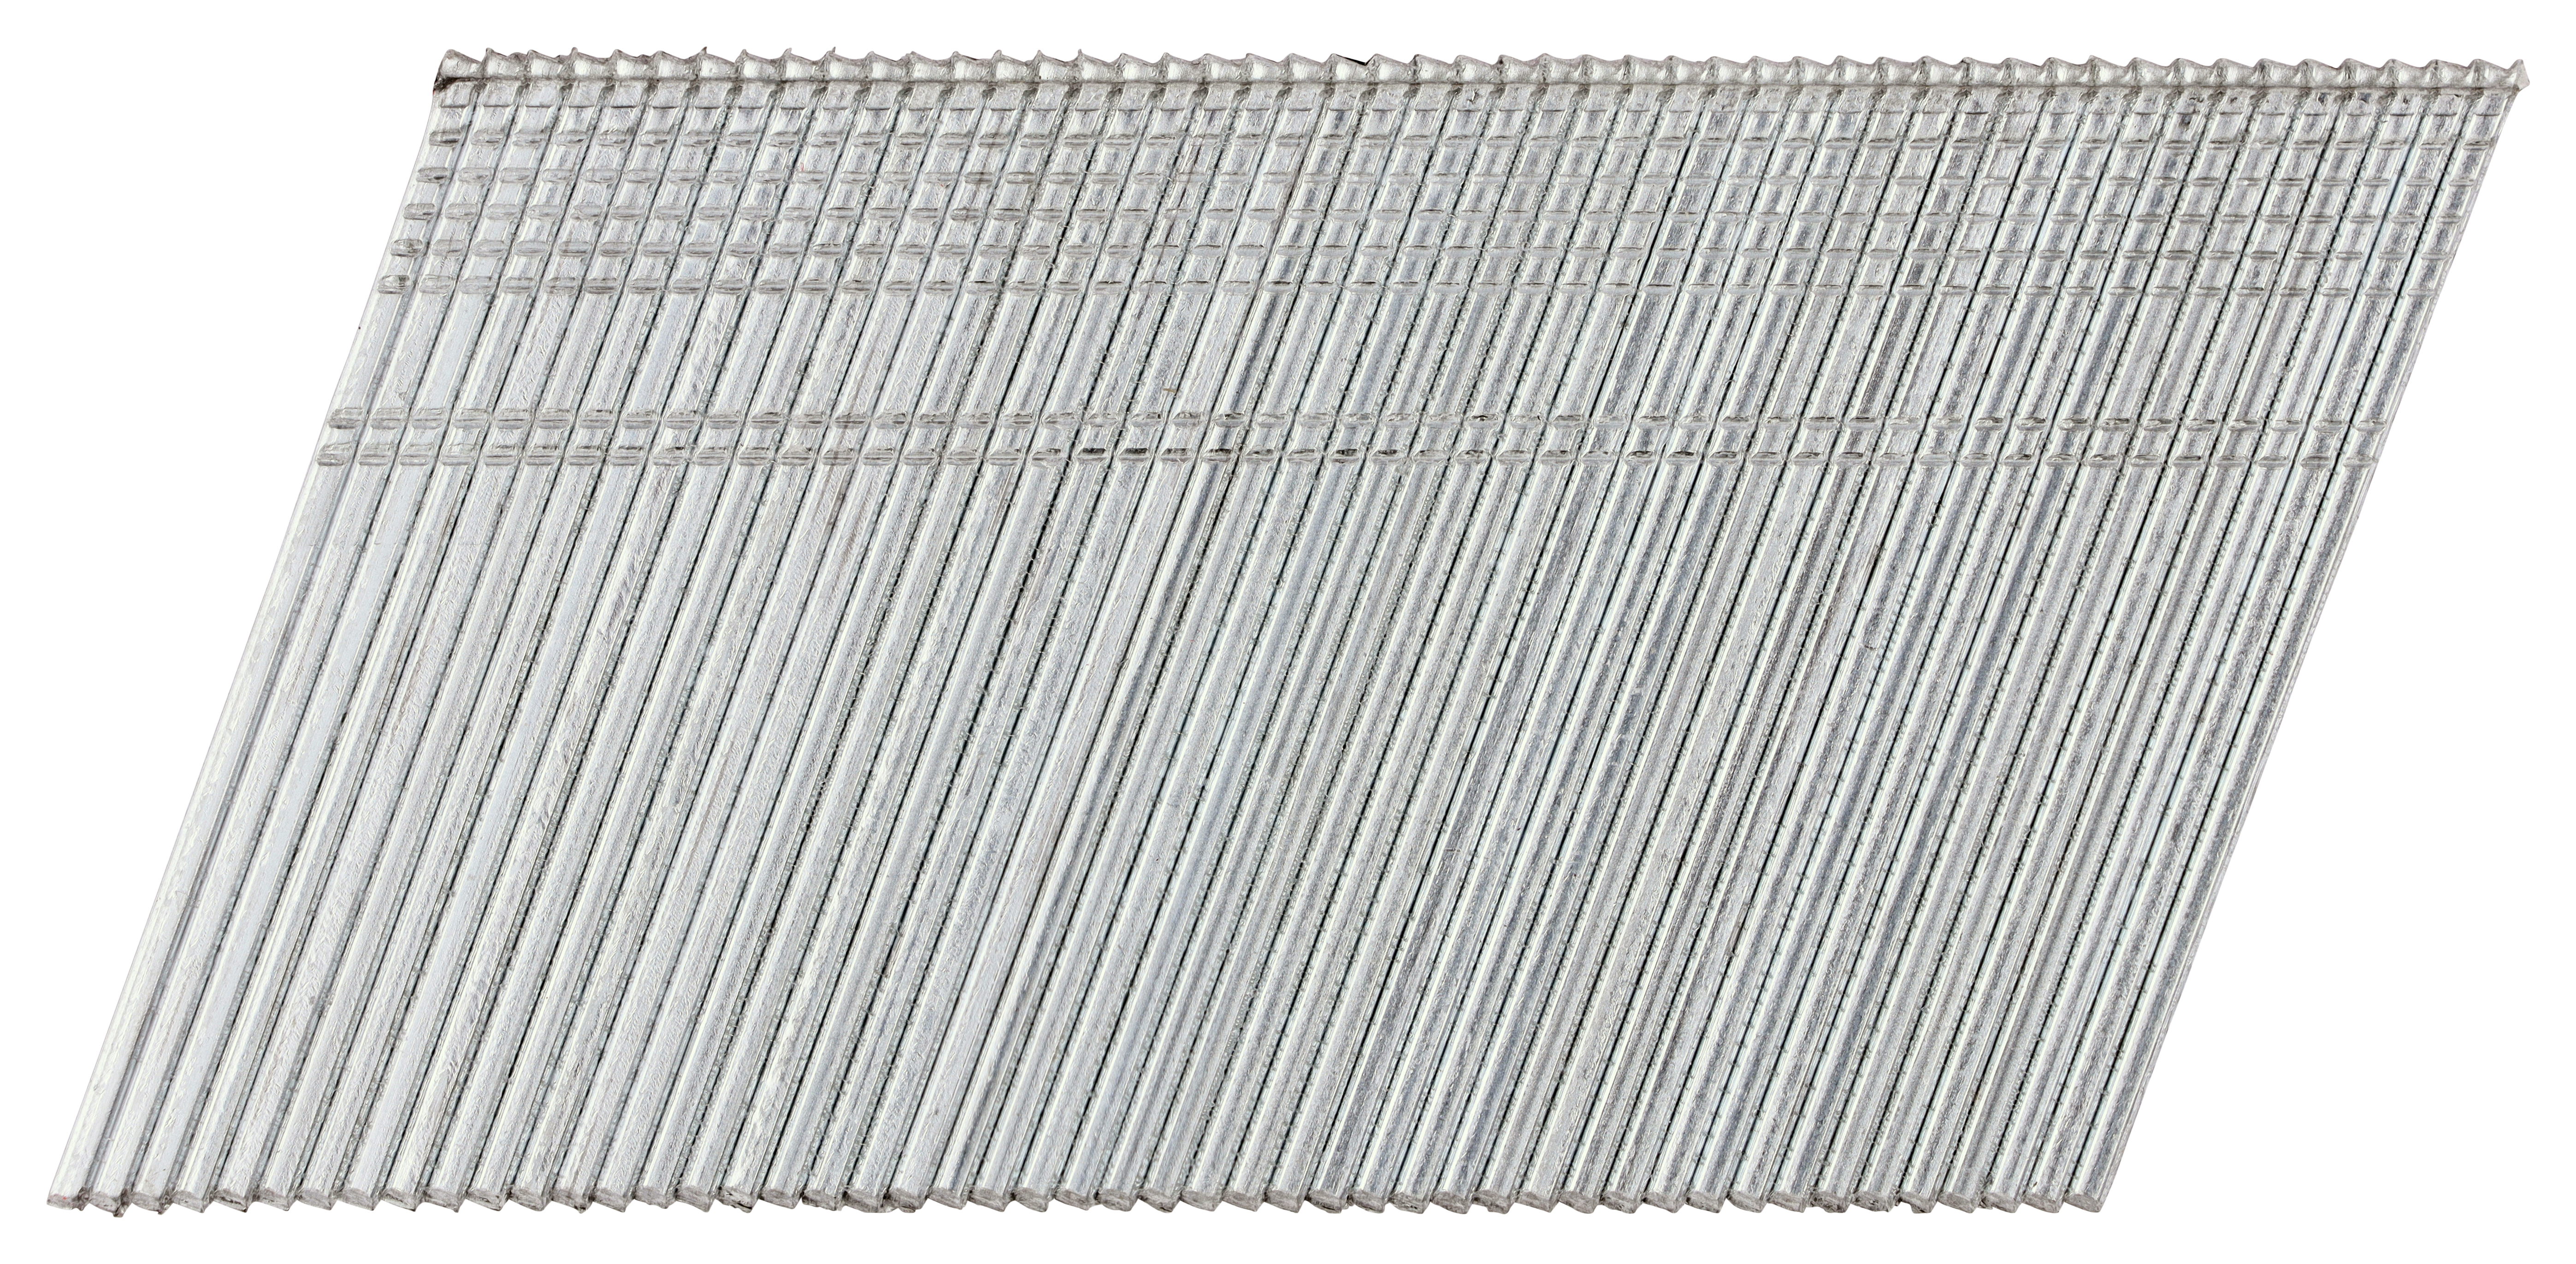 FirmaHold 16 Gauge Angled Galvanised Collated Brad Nails - 16 x 50mm